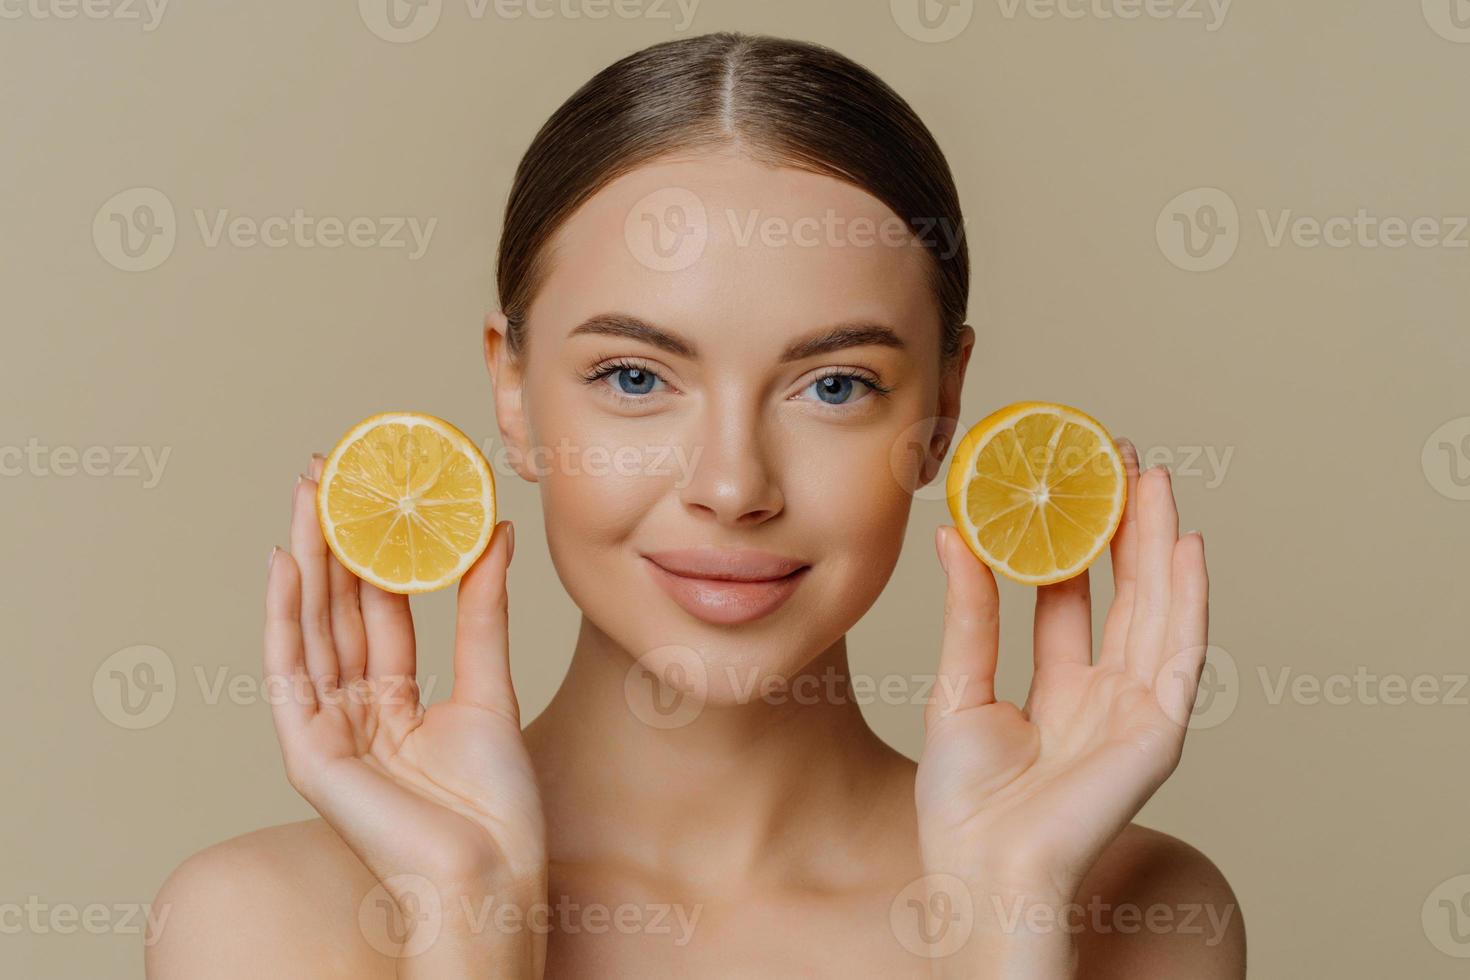 Headshot of beautiful brunette woman holds juicy lemon slices has healthy shiny skin gets vitamins from citrus stands bare shoulders indoor against beige background. Facial treatment concept photo